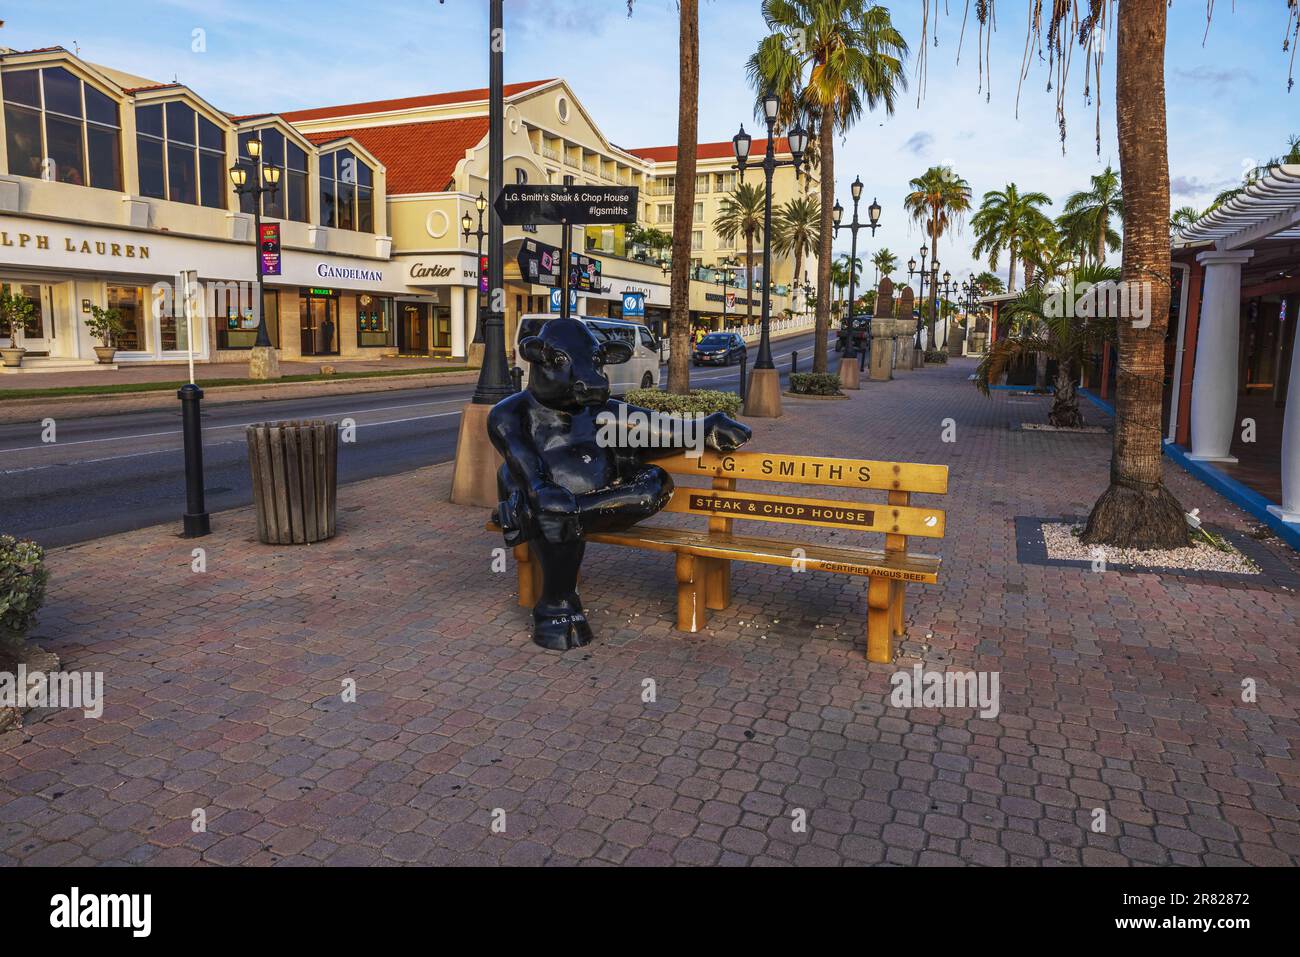 Beautiful view of main street in Oranjestad with cute statue of black hippopotamus on advertising bench for LG.Smith steak and chop hause. Oranjestad. Stock Photo